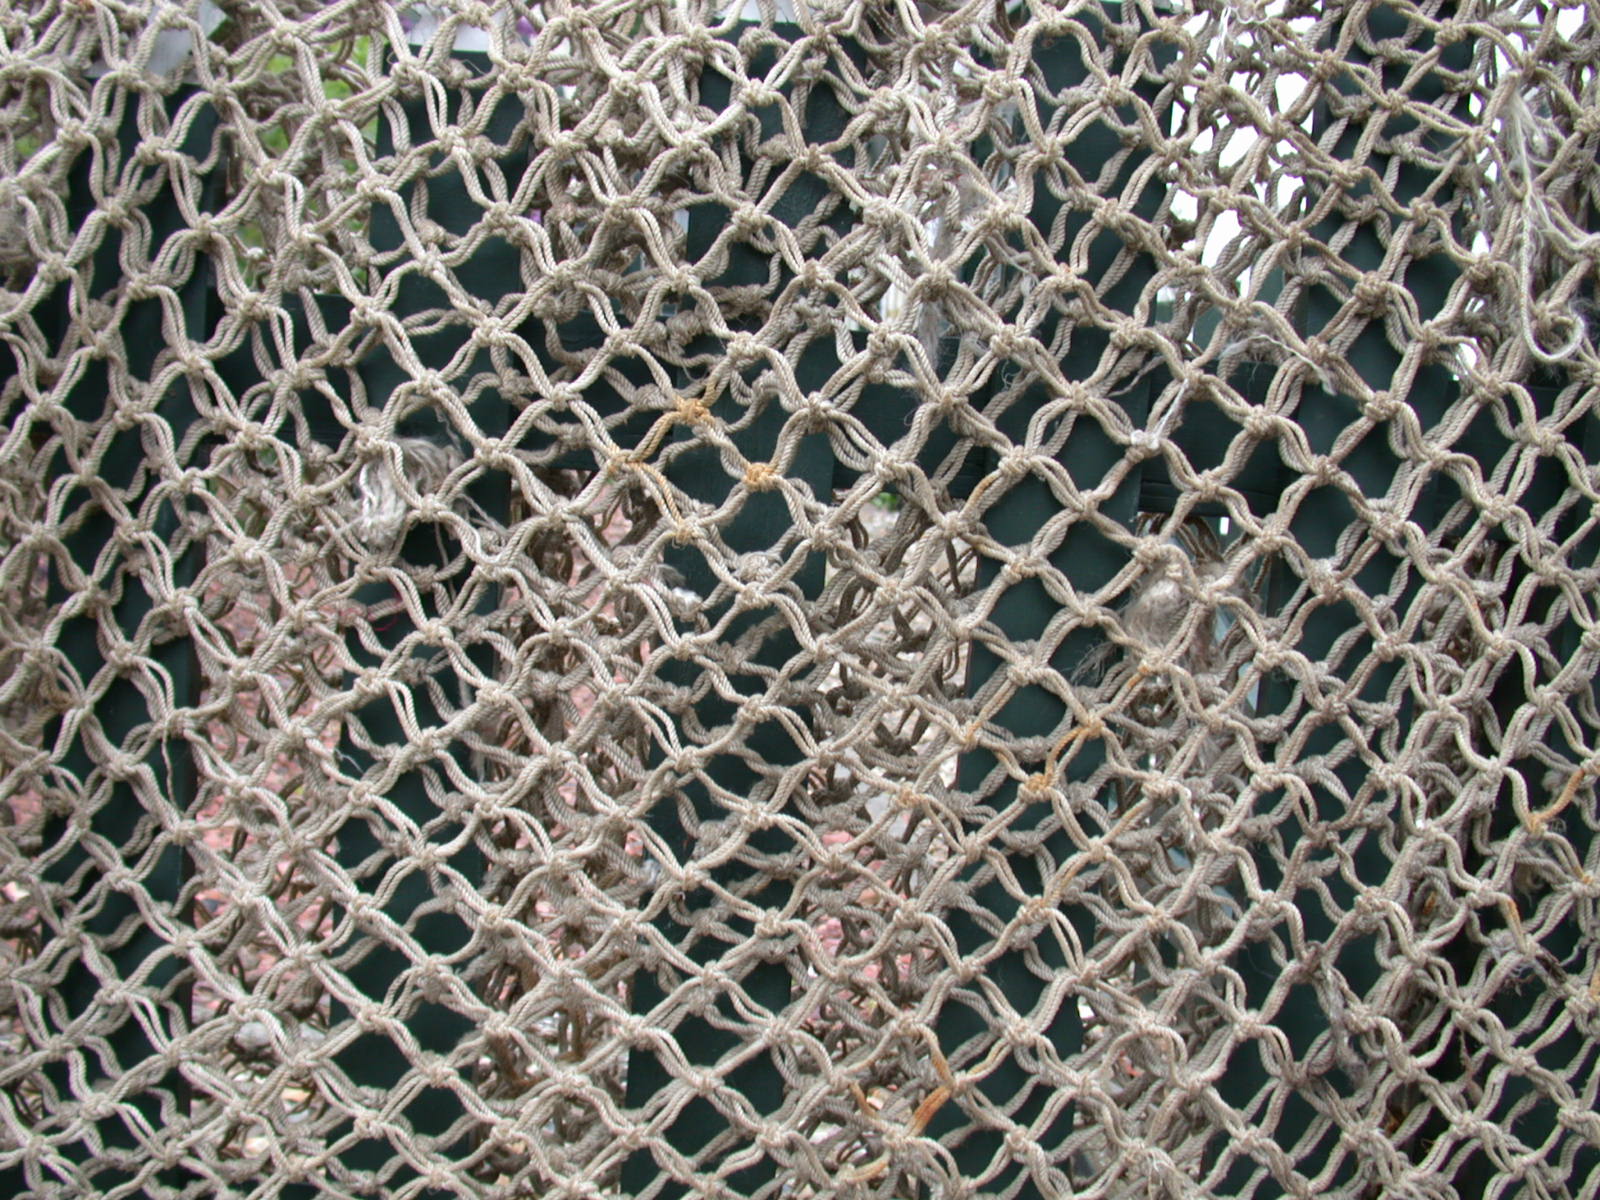 Image*After : textures : fishing net nets rope knots mesh